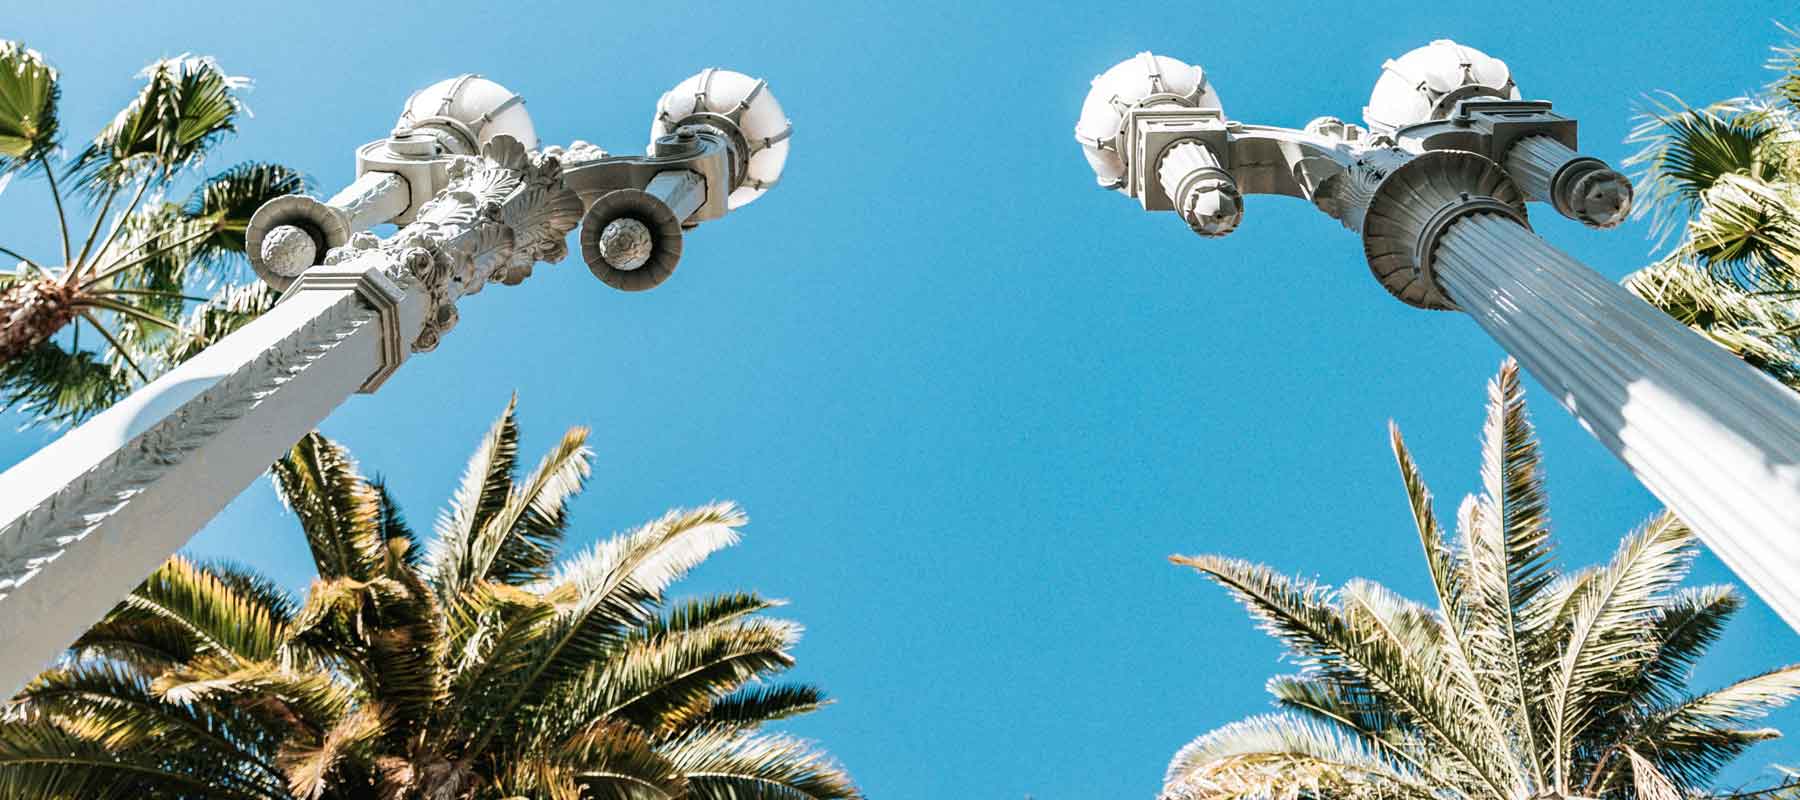 a worms eye view looking up at street lights and palm trees